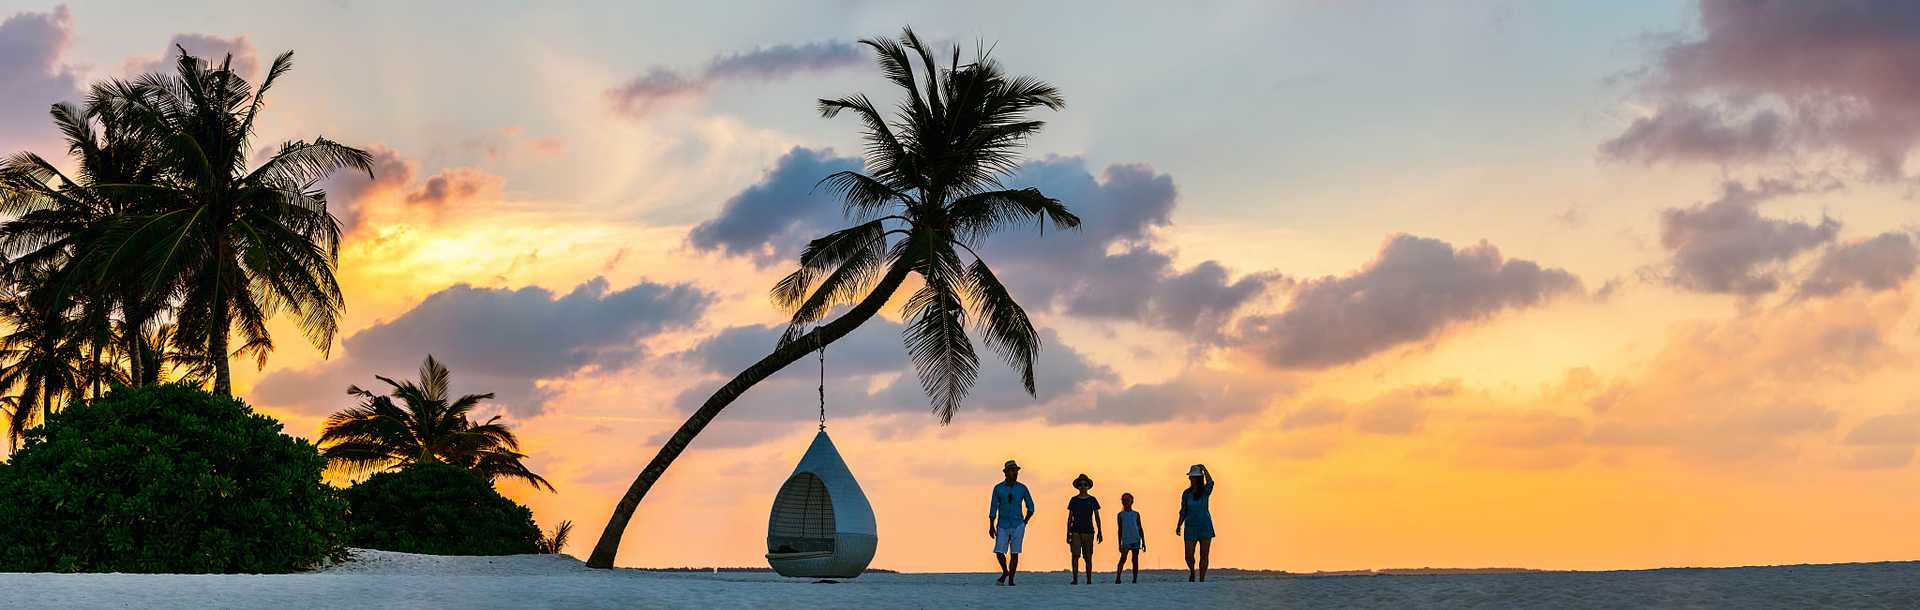 Family walking on the beach in the Maldives at sunset